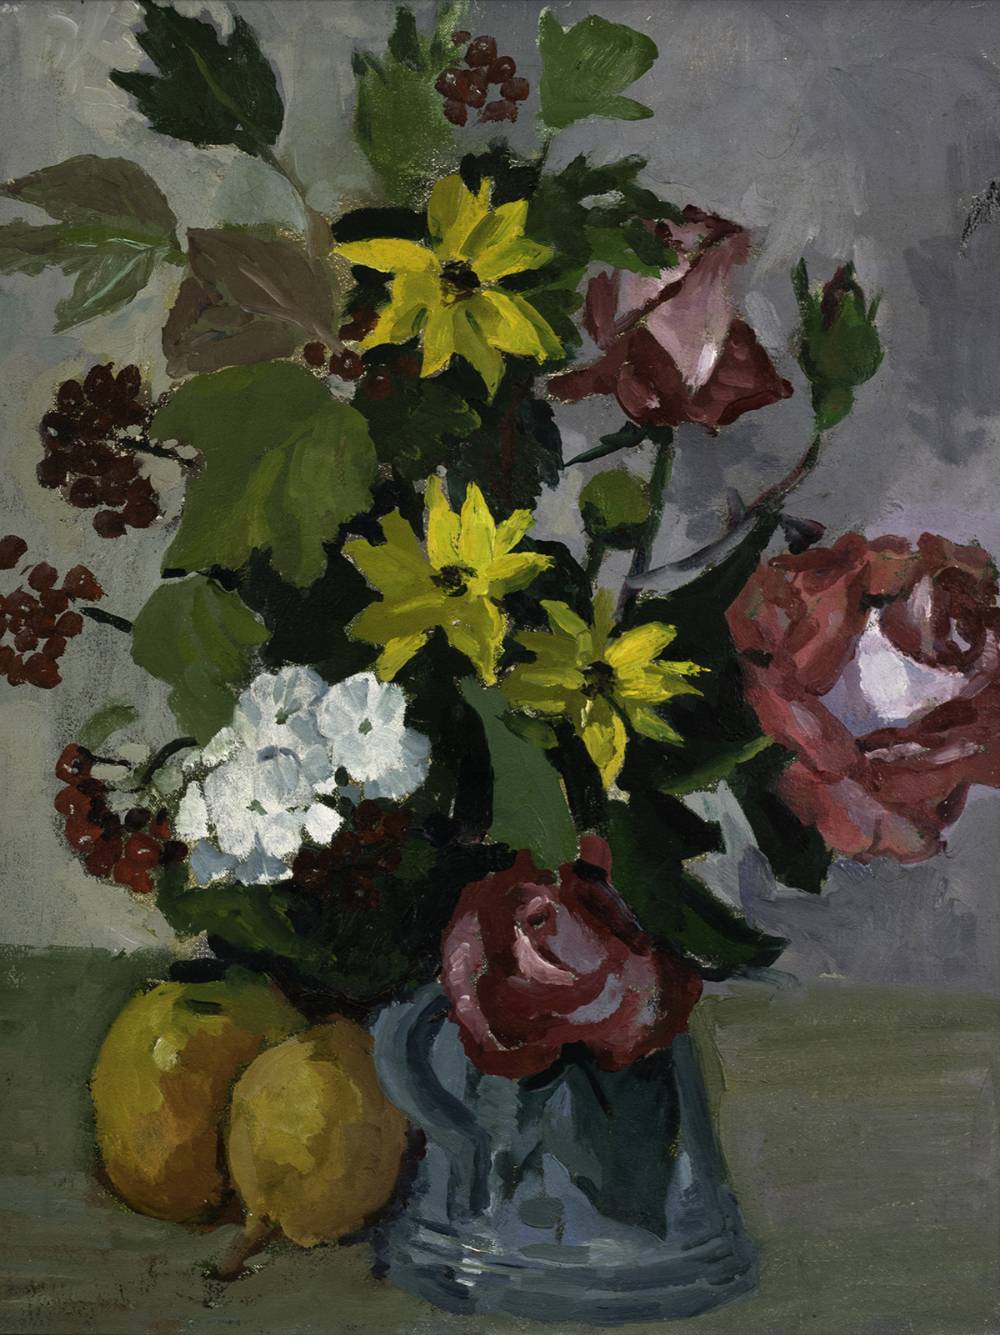 STILL LIFE WITH FLOWERS AND FRUIT by Nuala Stephenson sold for 220 at Whyte's Auctions